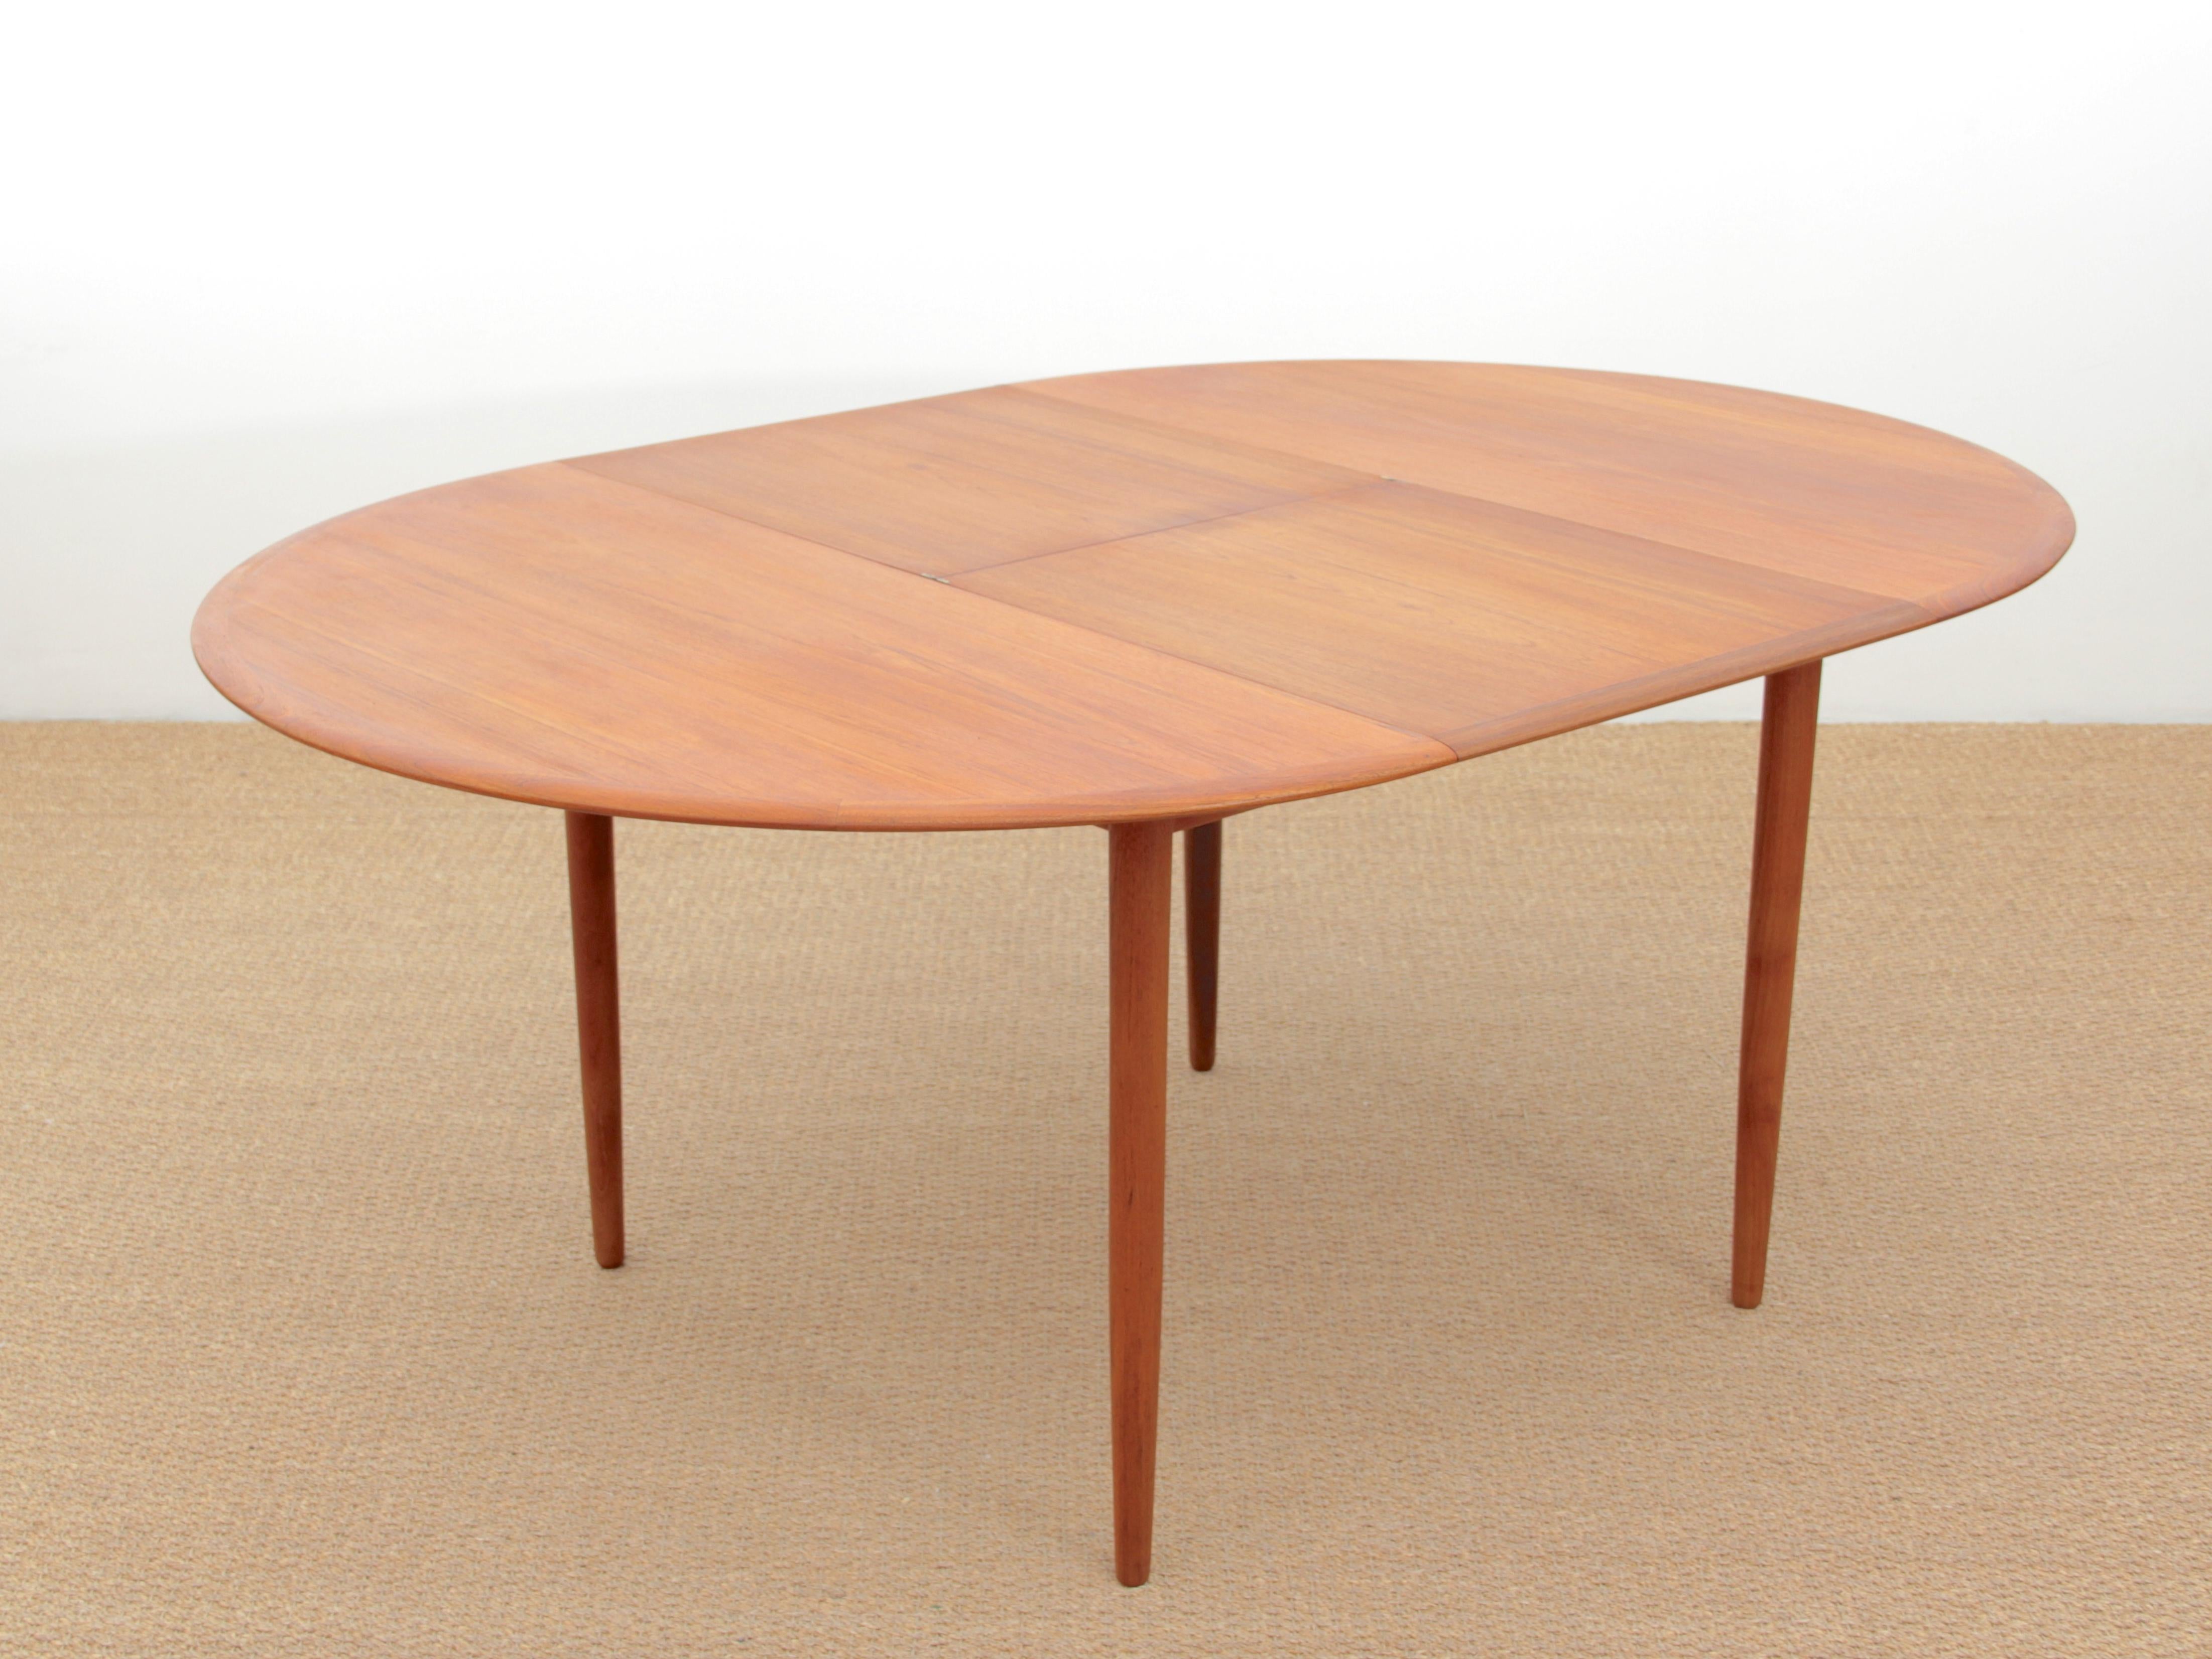 Mid-20th Century Mid-Century Modern Scandinavian Round Dining in Teak 4/8 Seats by Hovmand-Ols For Sale